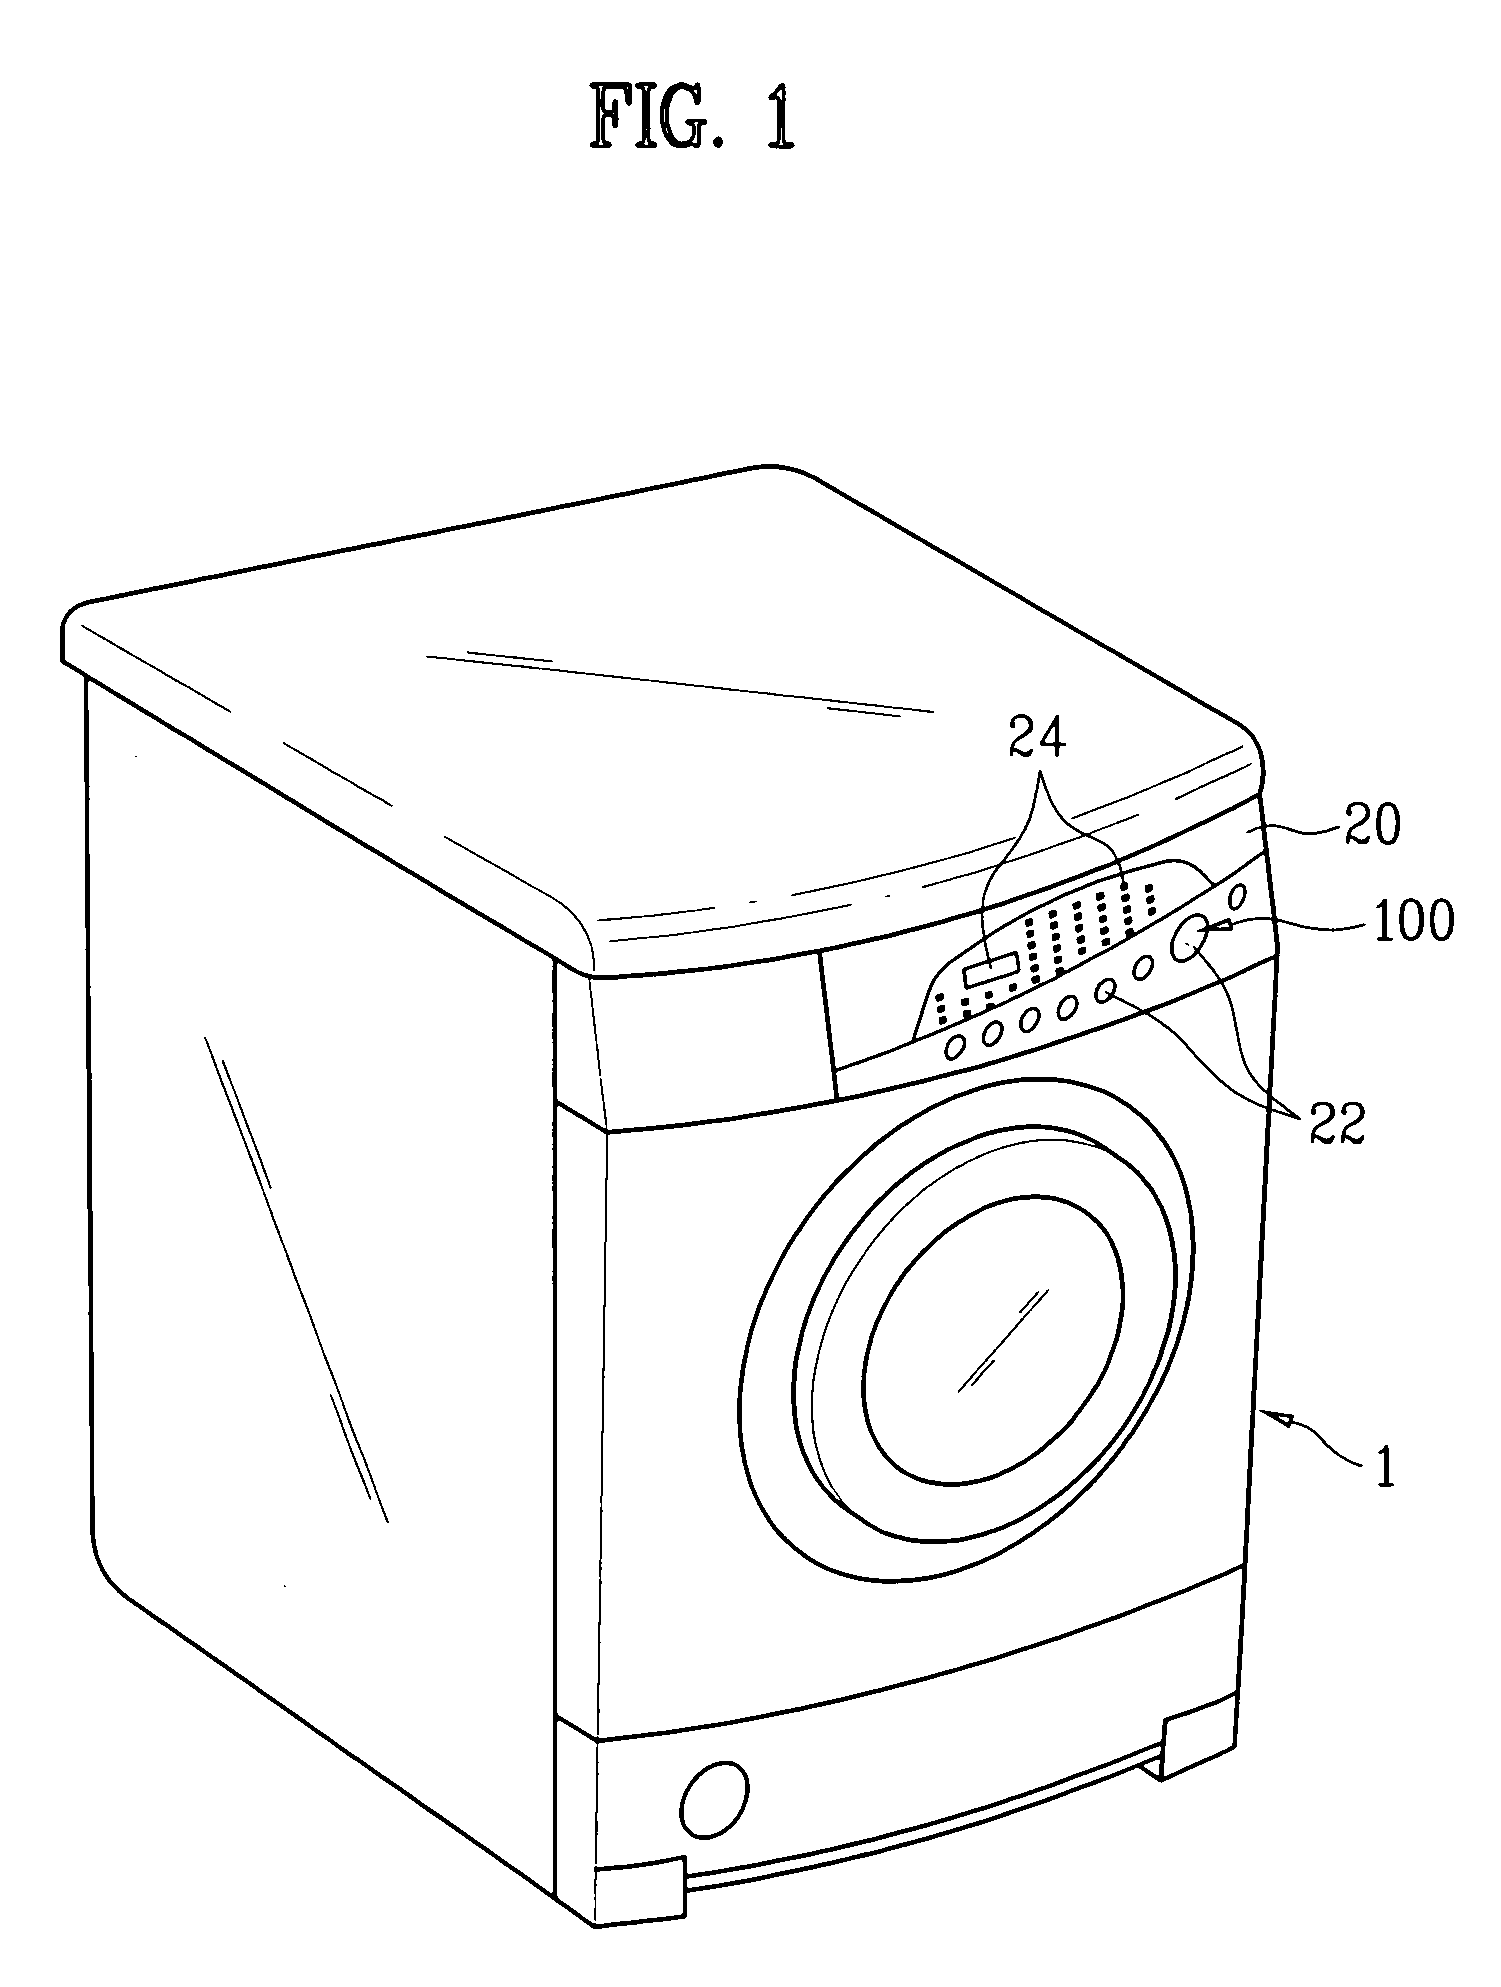 Rotary knob assembly for home appliance